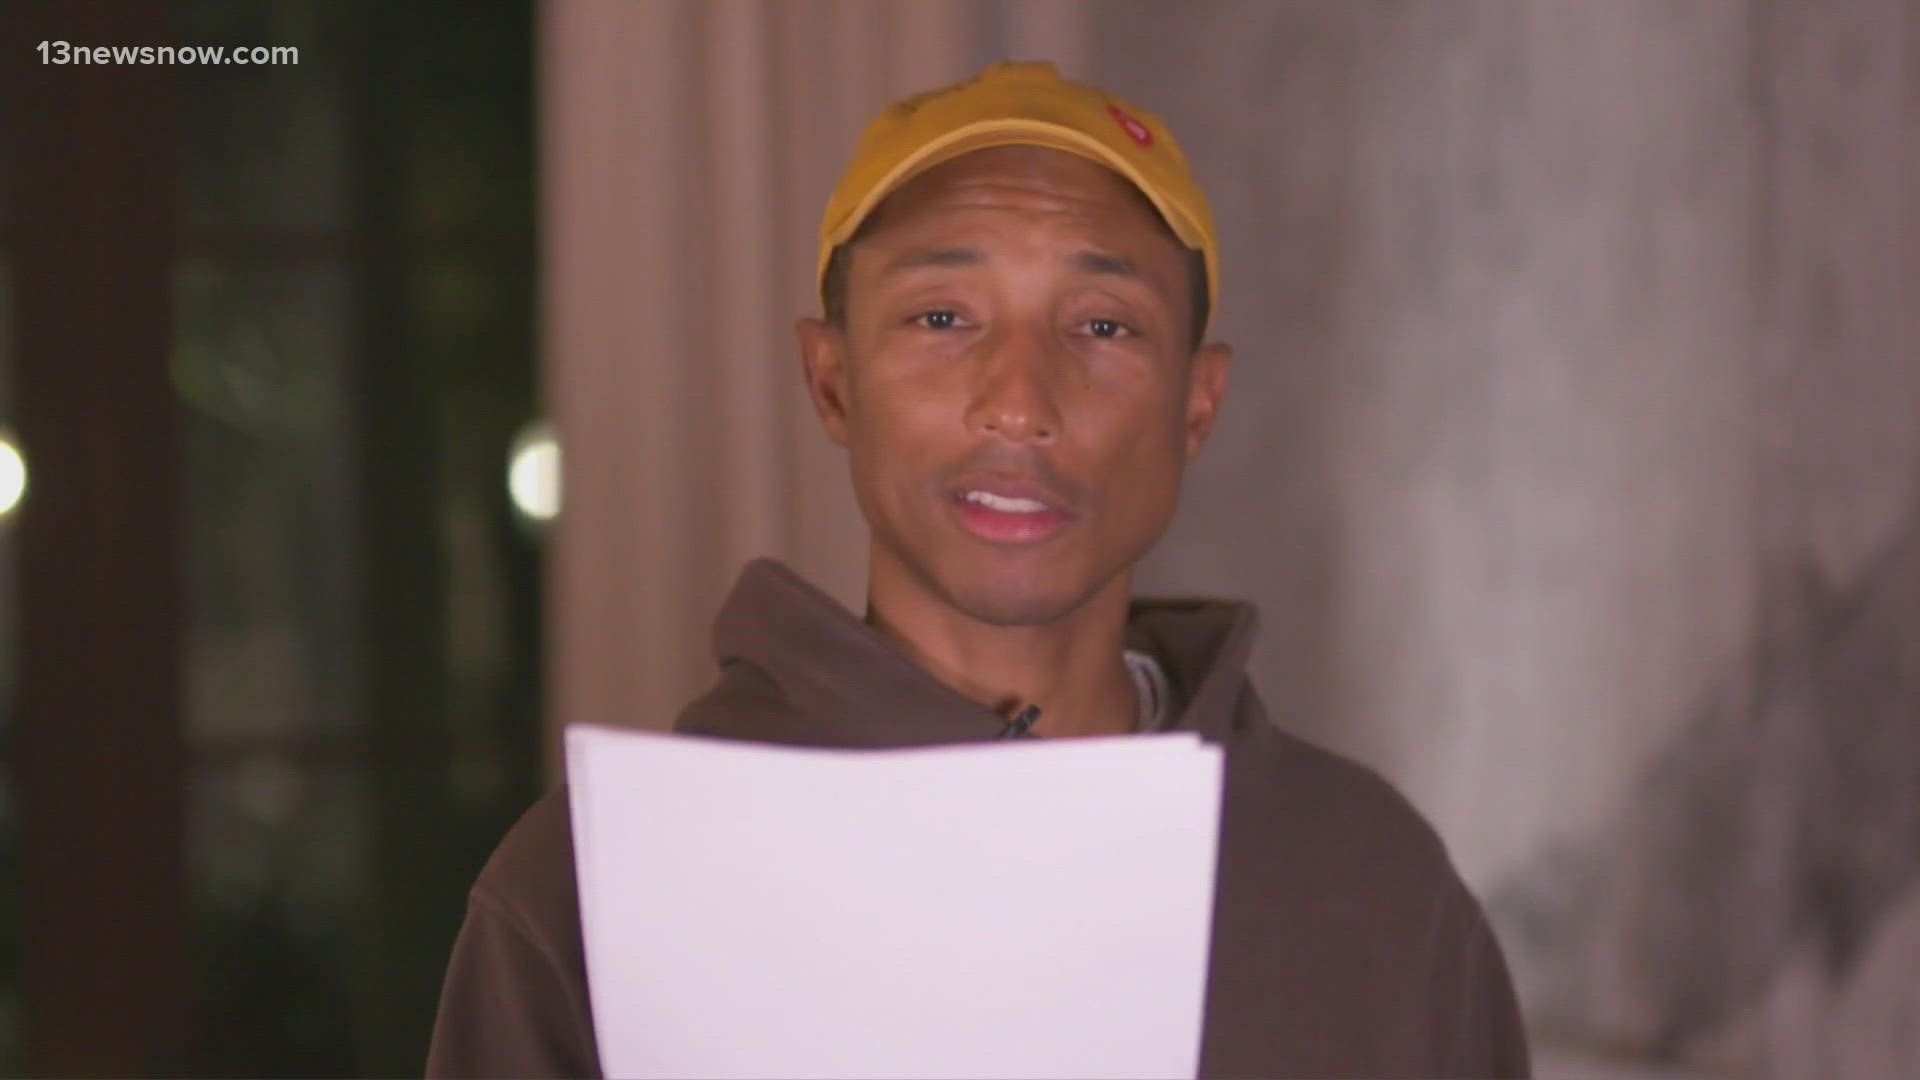 Pharrell Williams is challenging corporate America to "do more" by supporting entrepreneurs of color and adopting economic equity measures.